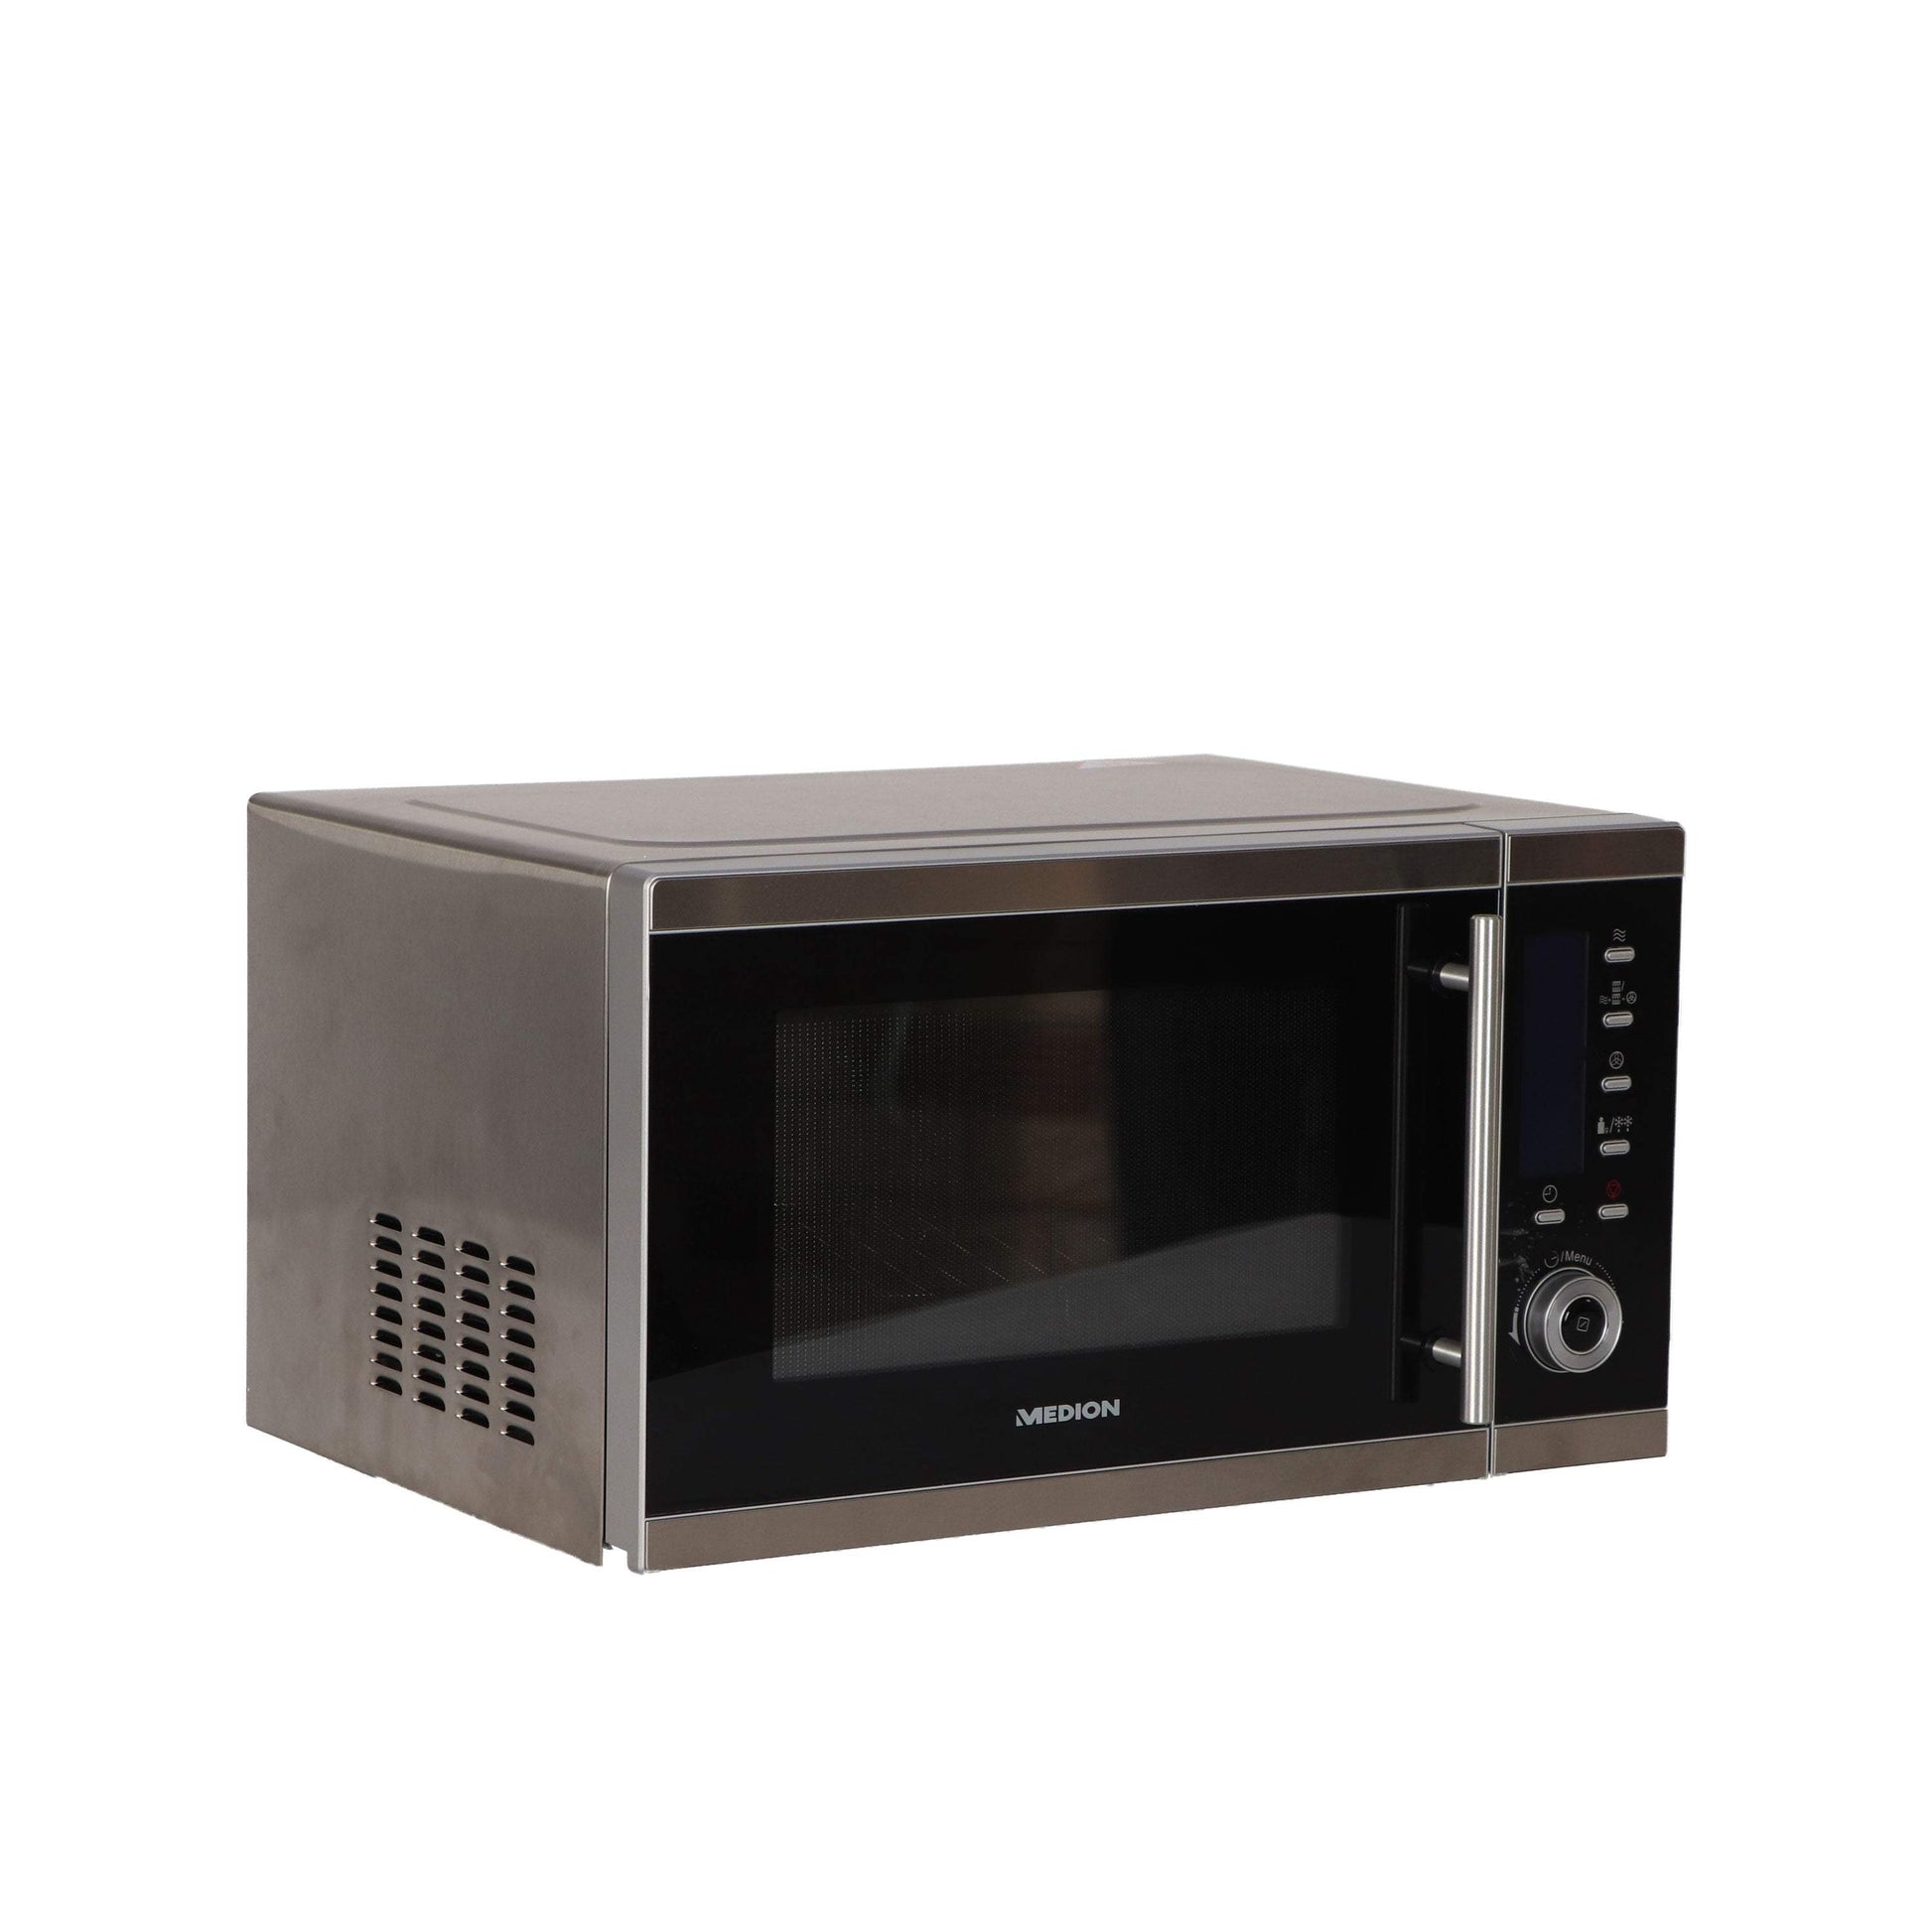 MEDION 4 IN 1 MICROWAVE WITH GRILL 25 Liter 2500w Hot Air Power-Royal Brands Co-